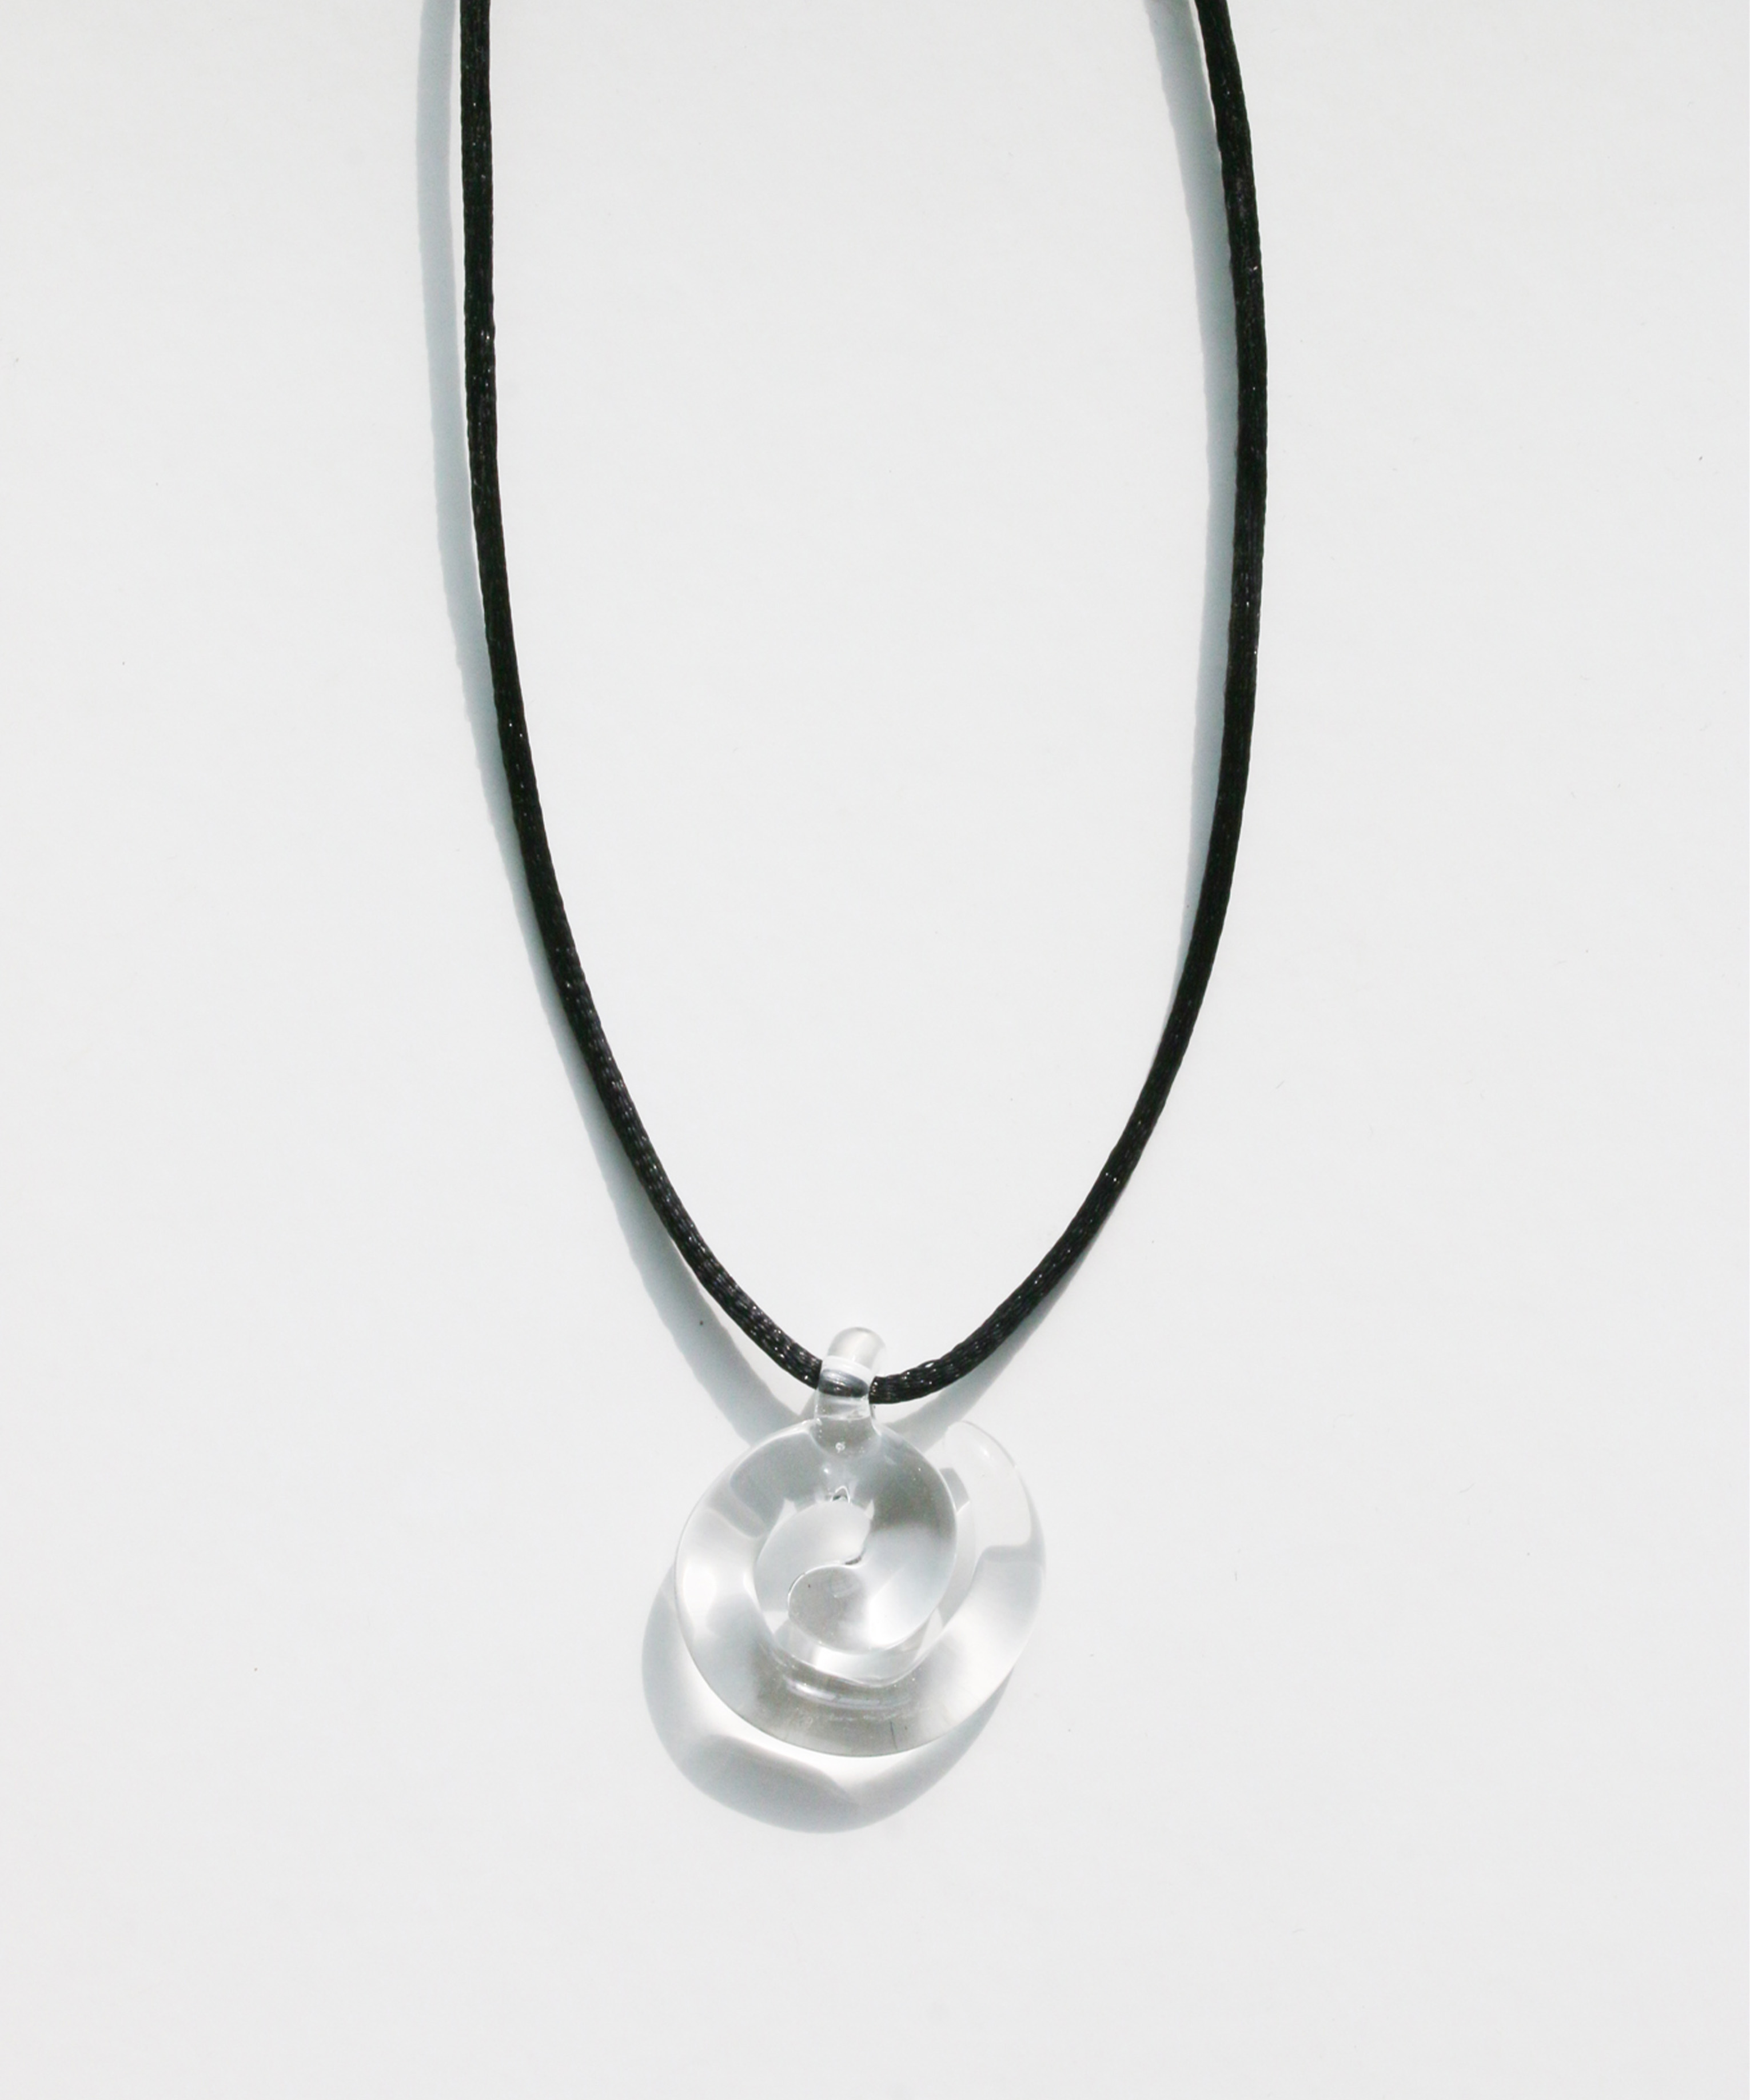 Spiral Glass Necklace